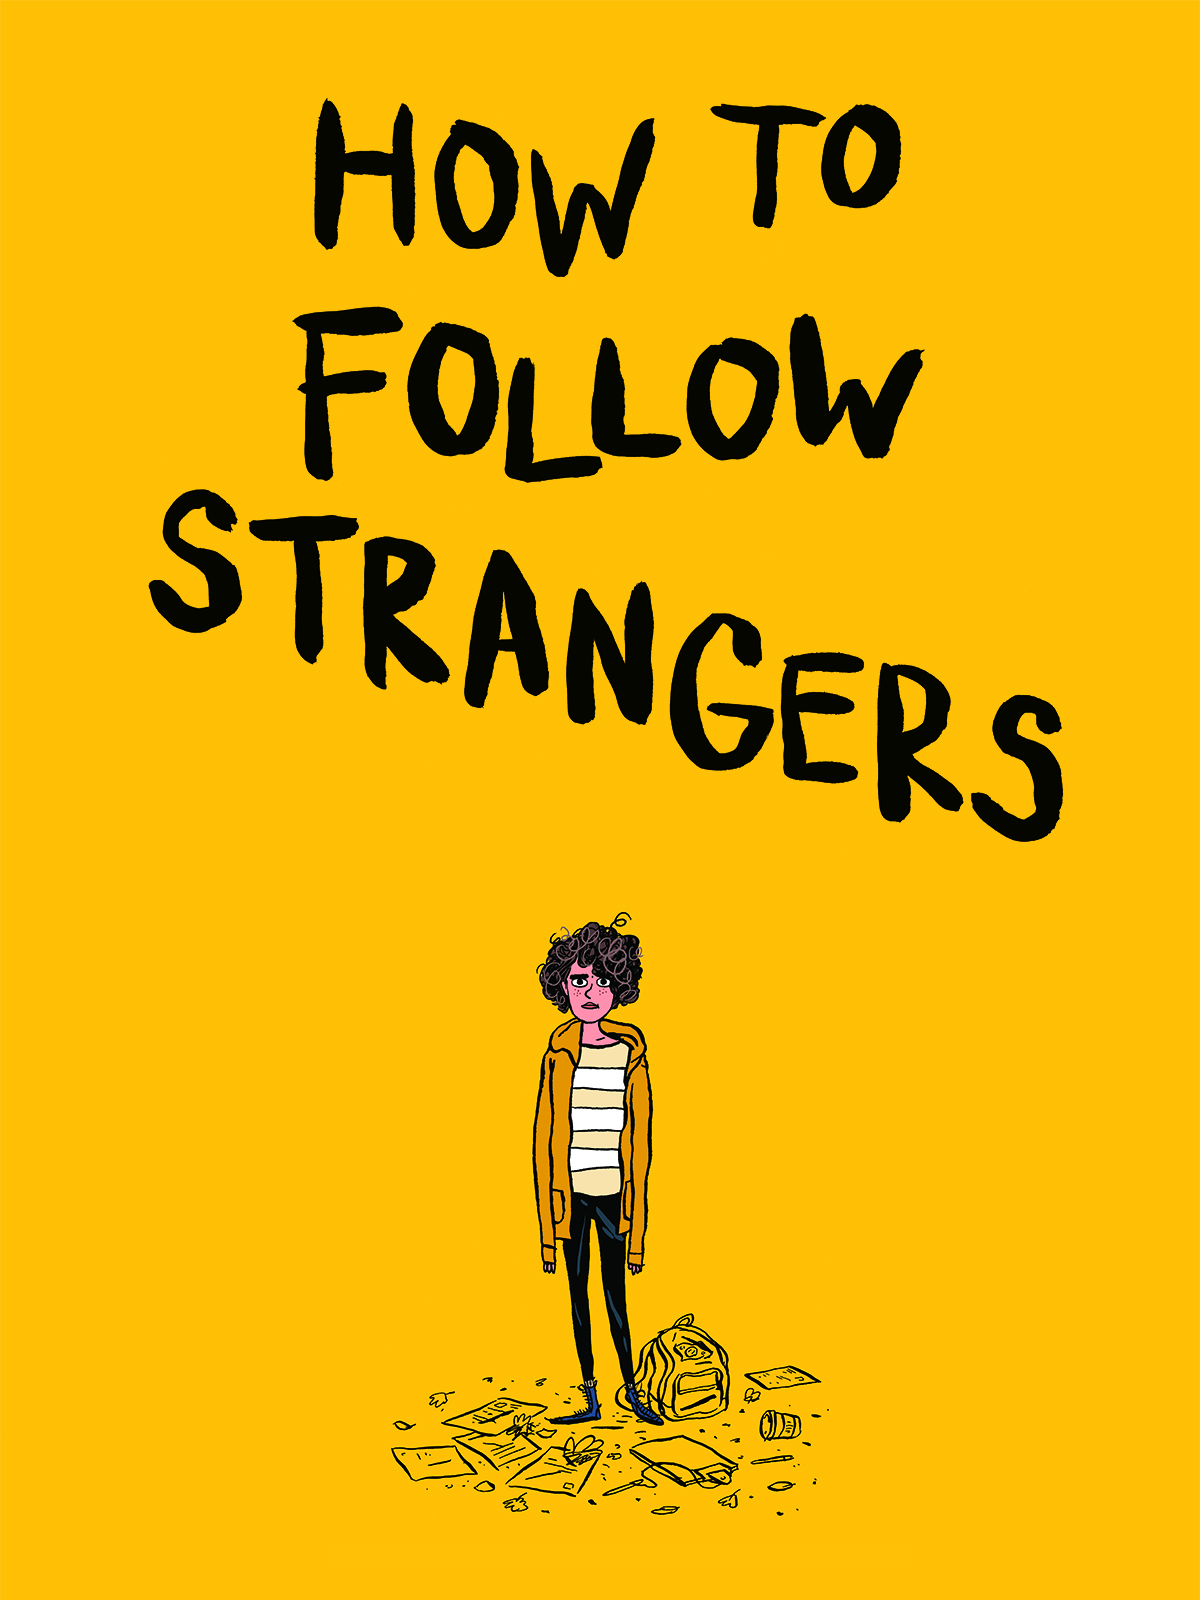 How To Follow Strangers